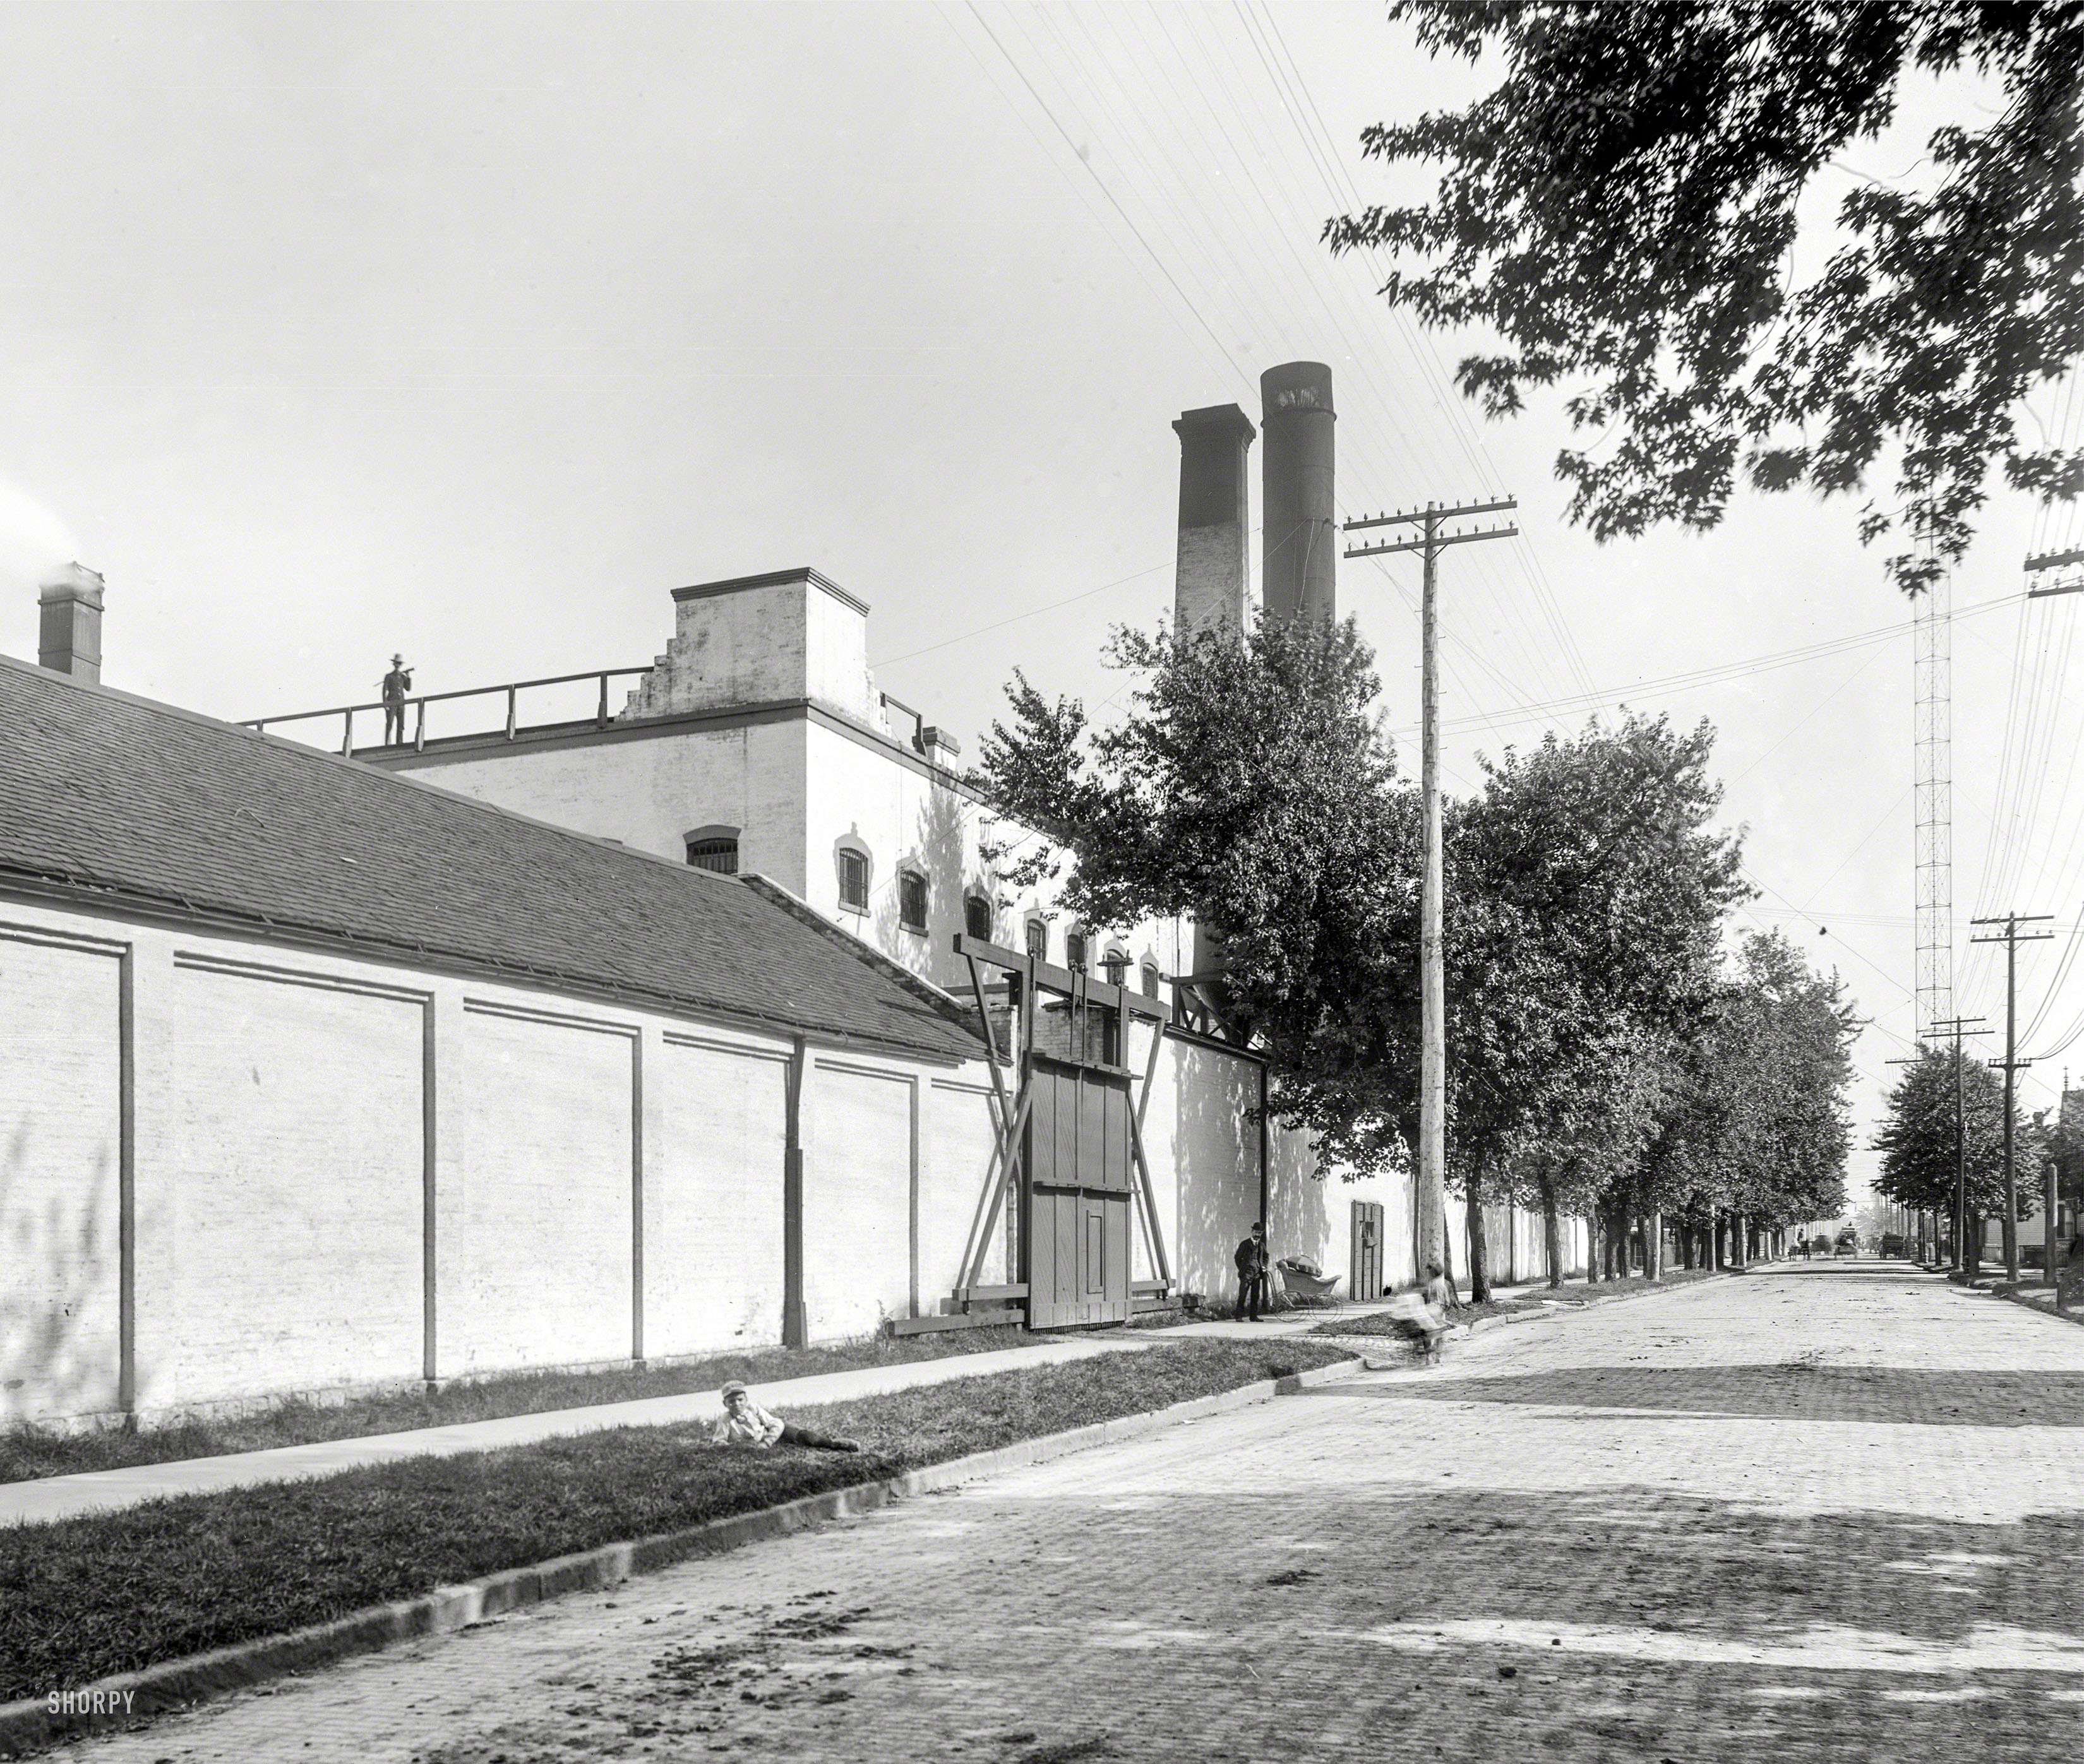 Detroit circa 1910. "House of Correction." With everyone in place for the big jailbreak. 8x10 glass negative, Detroit Publishing Company. View full size.